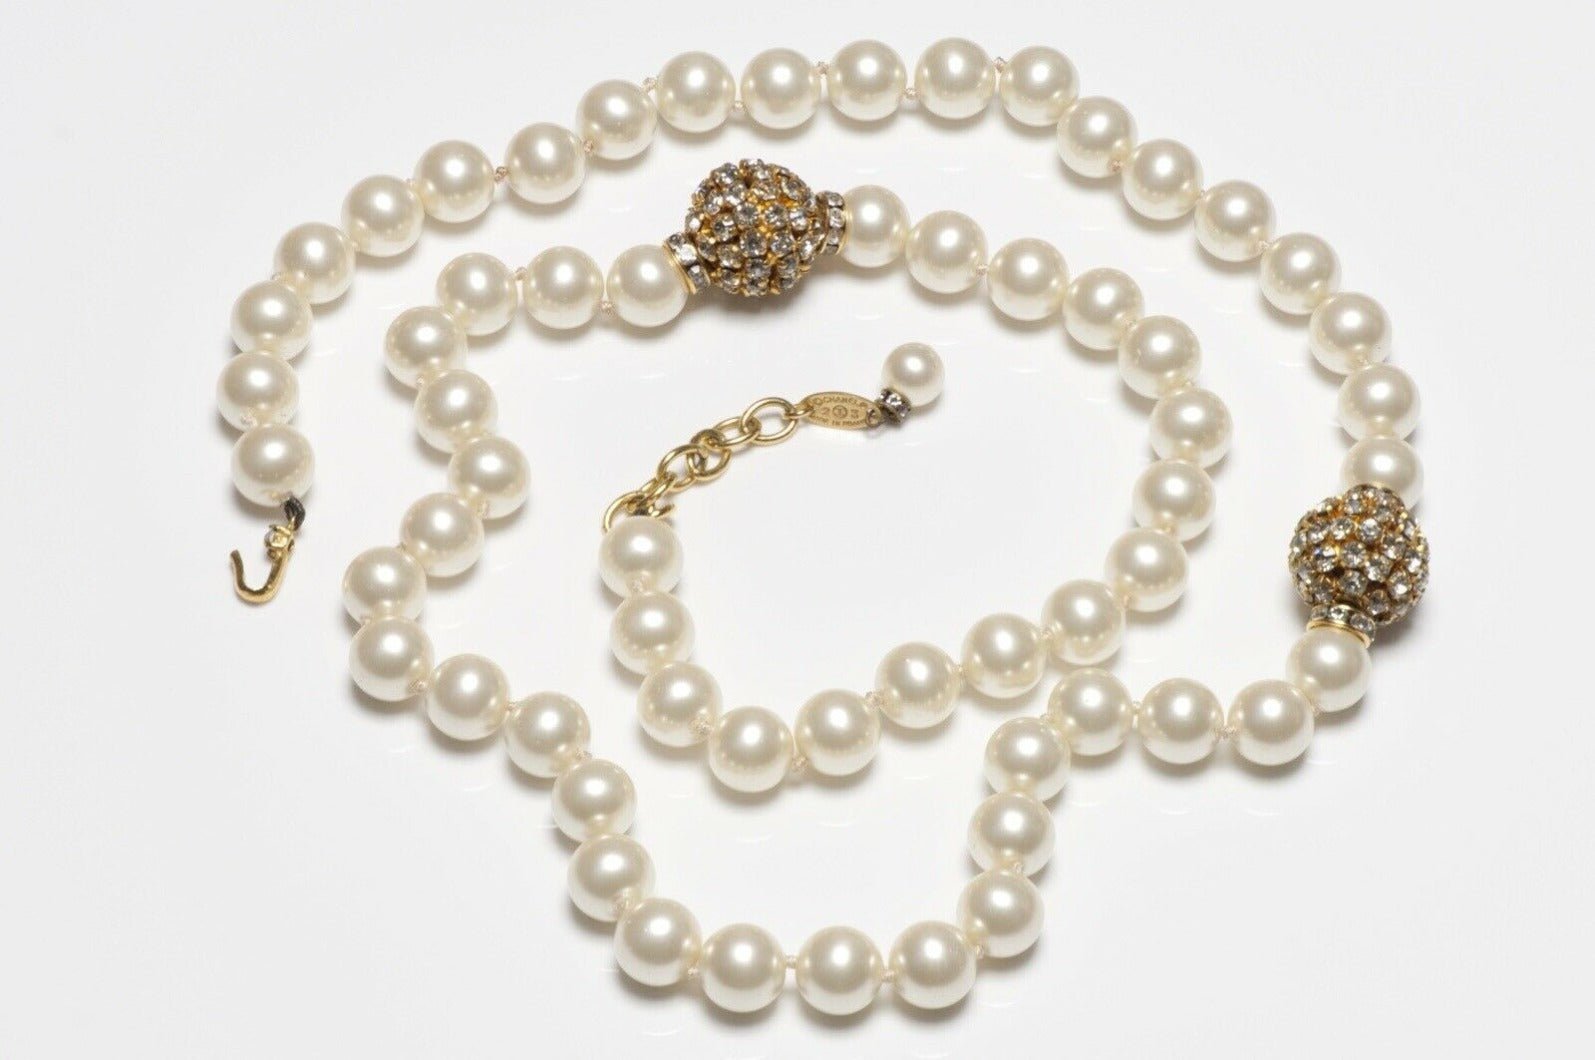 CHANEL Paris 1980’s Crystal Pearl Strand Necklace